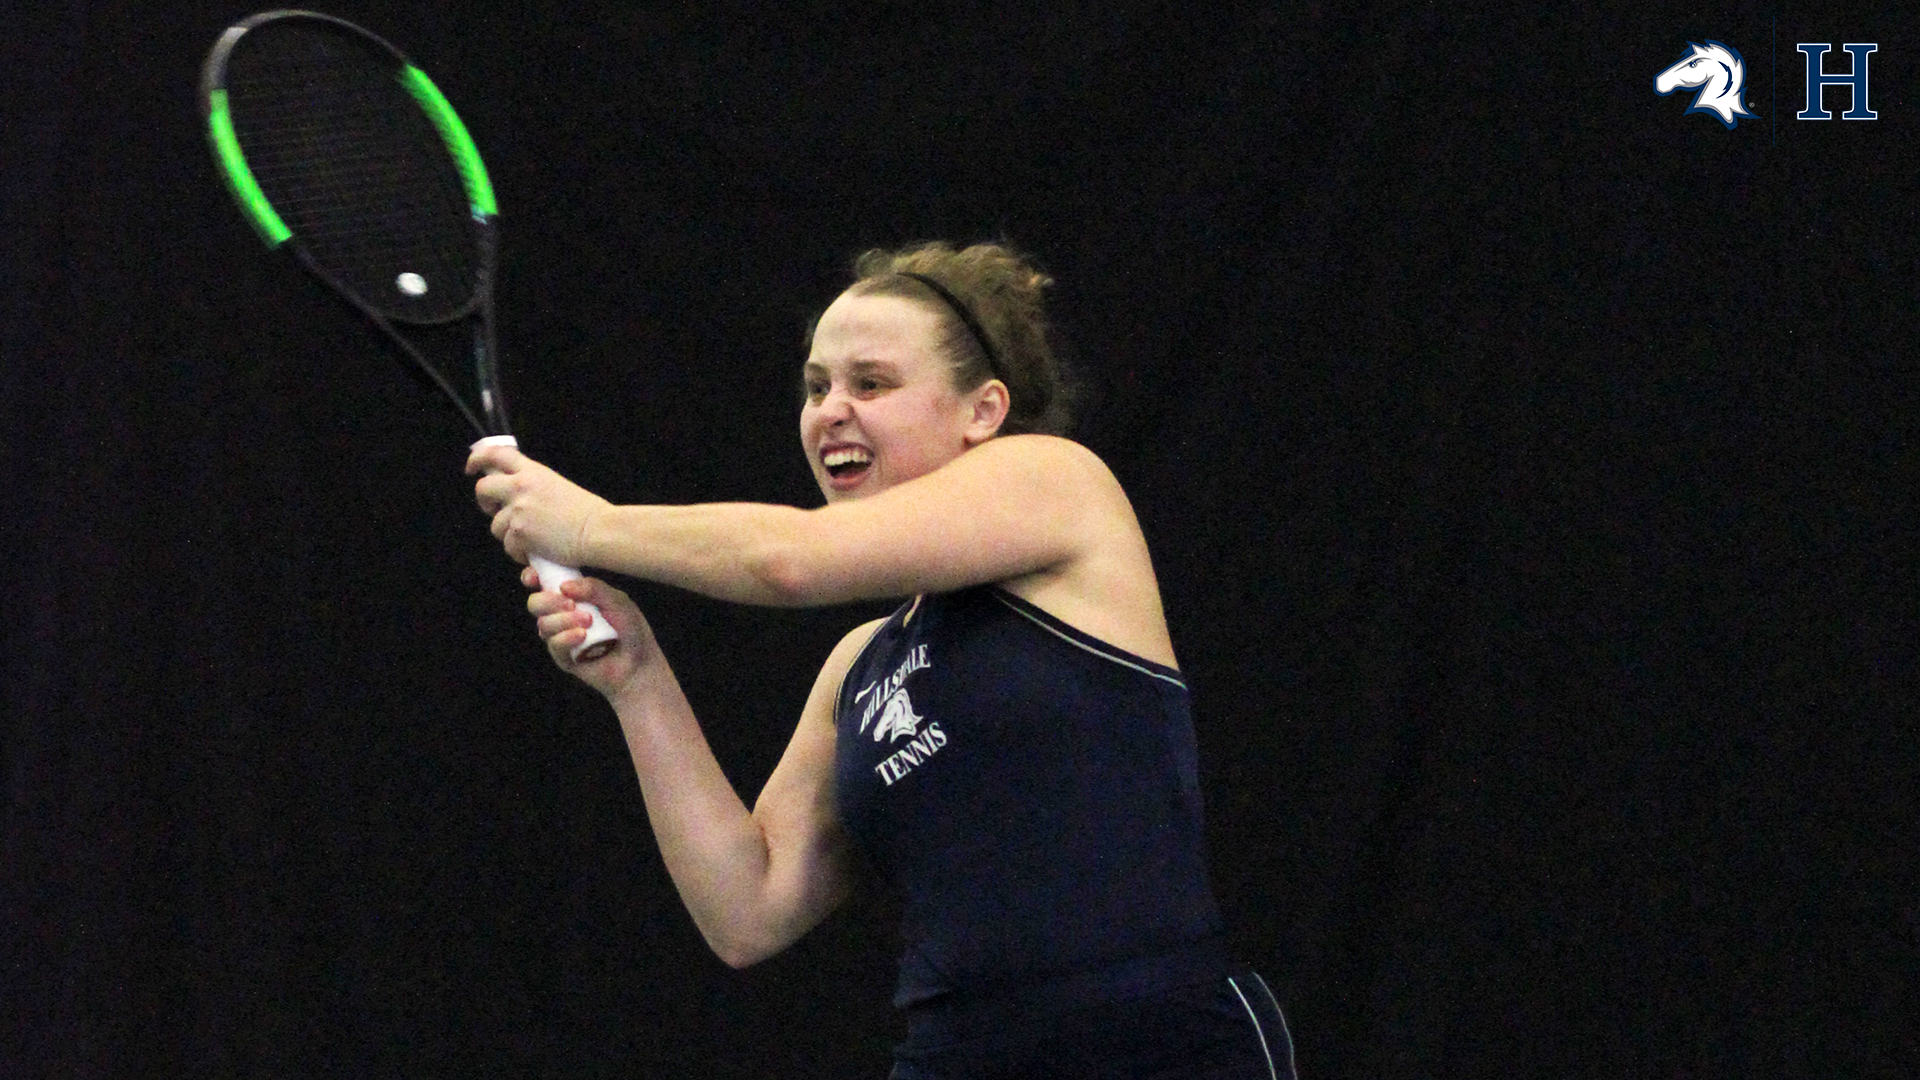 Chargers' Sarah Hackman wins third G-MAC Women's Tennis Player of the Week honor (March 21-28)